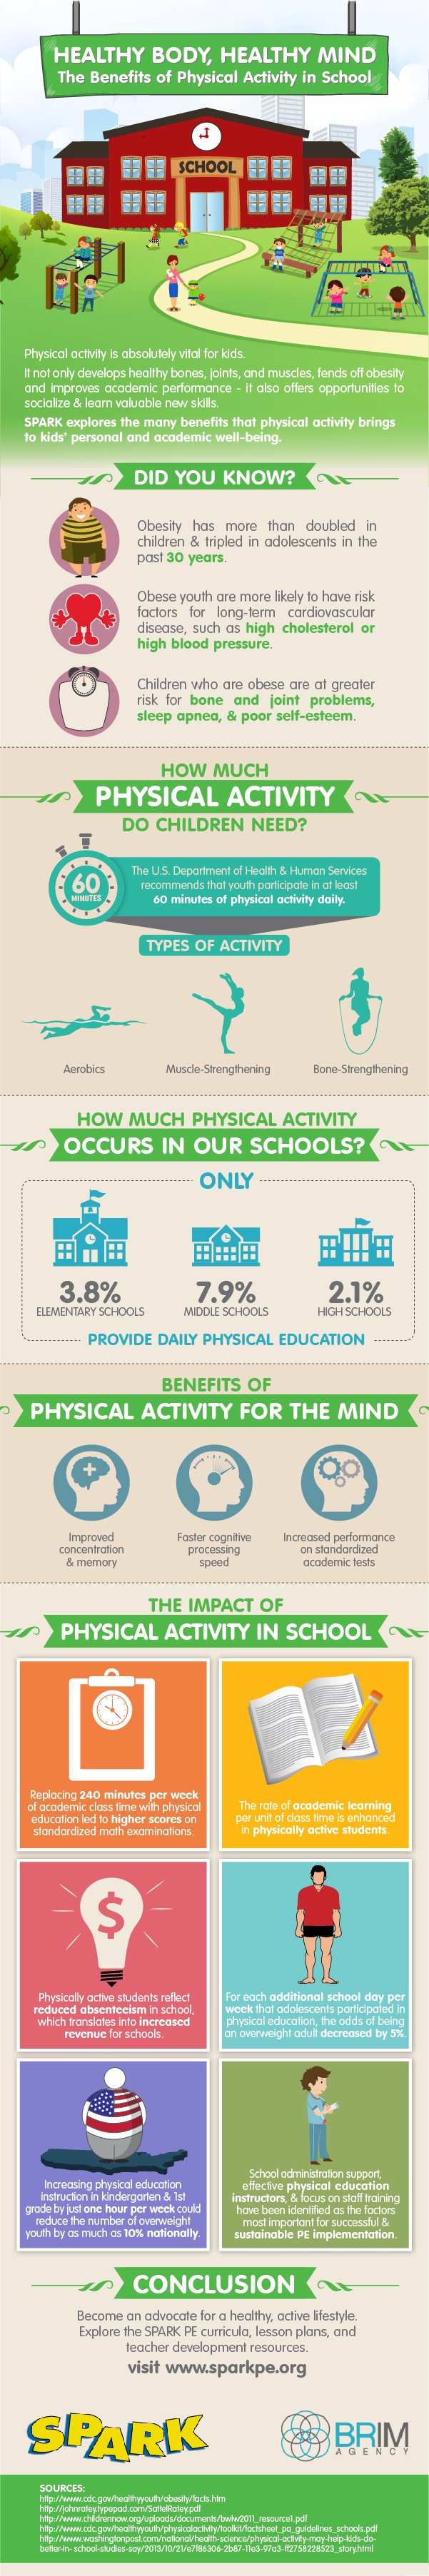 The Benefits of Physical Activity in School Infographic